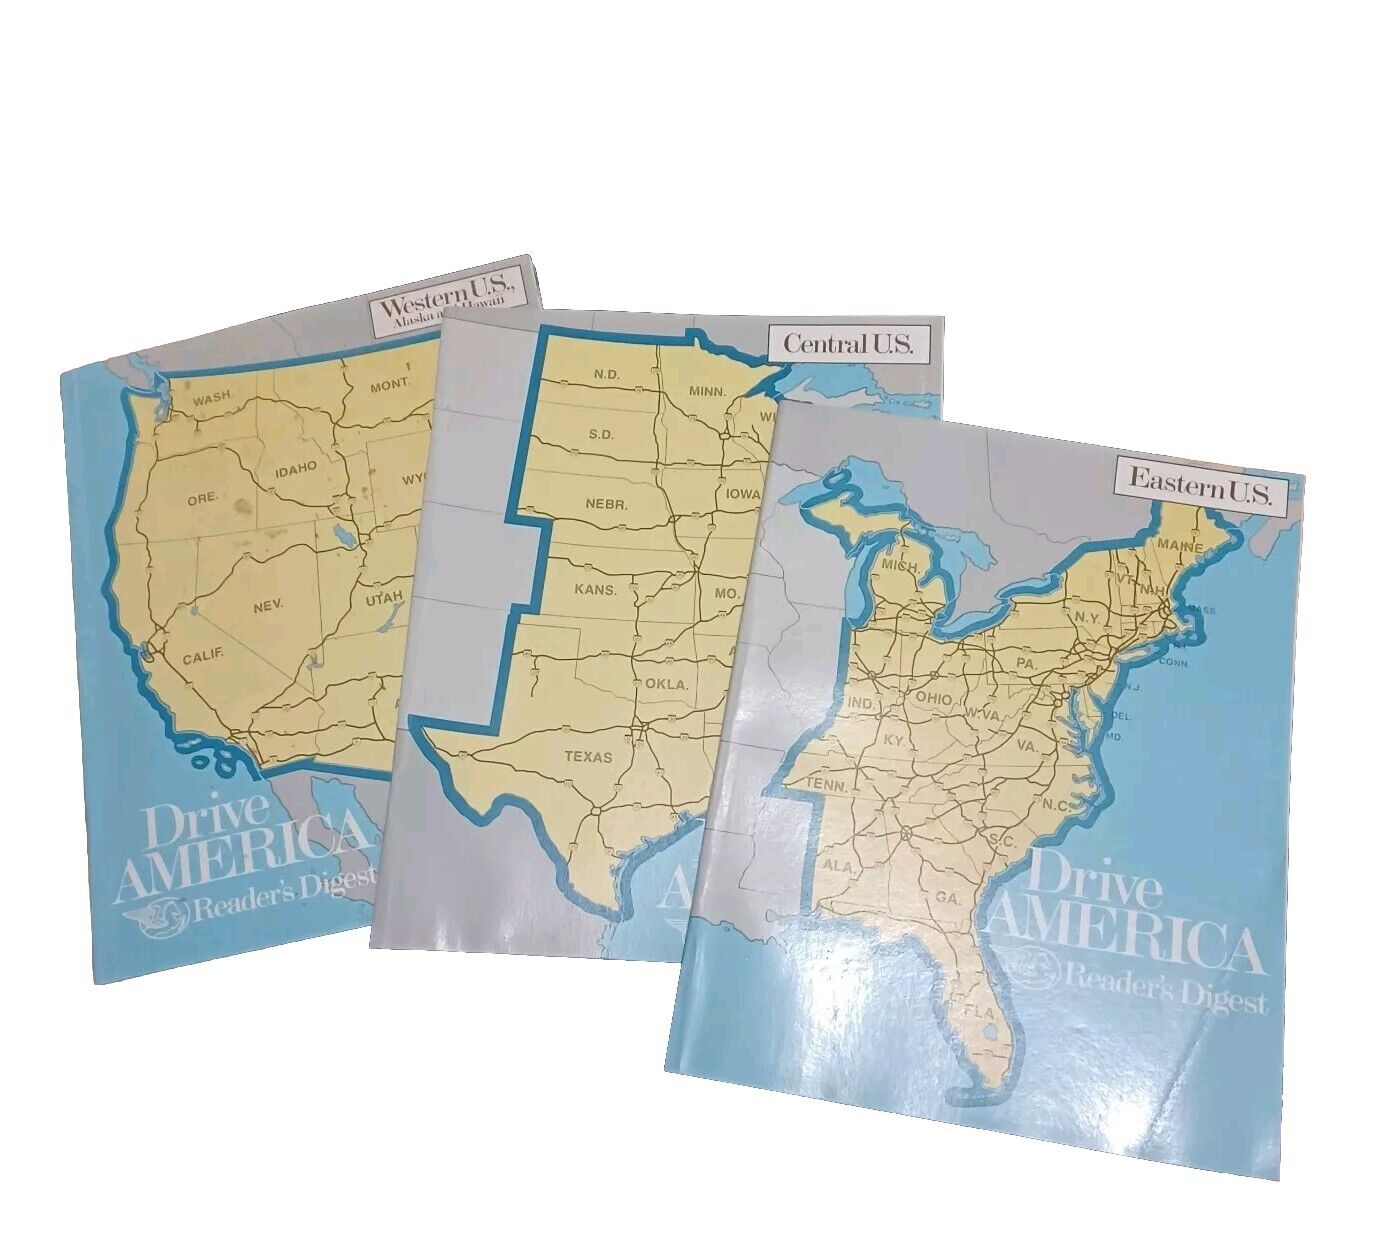 Drive America - 3 Map Set by Reader\'s Digest Western US Central US Eastern US